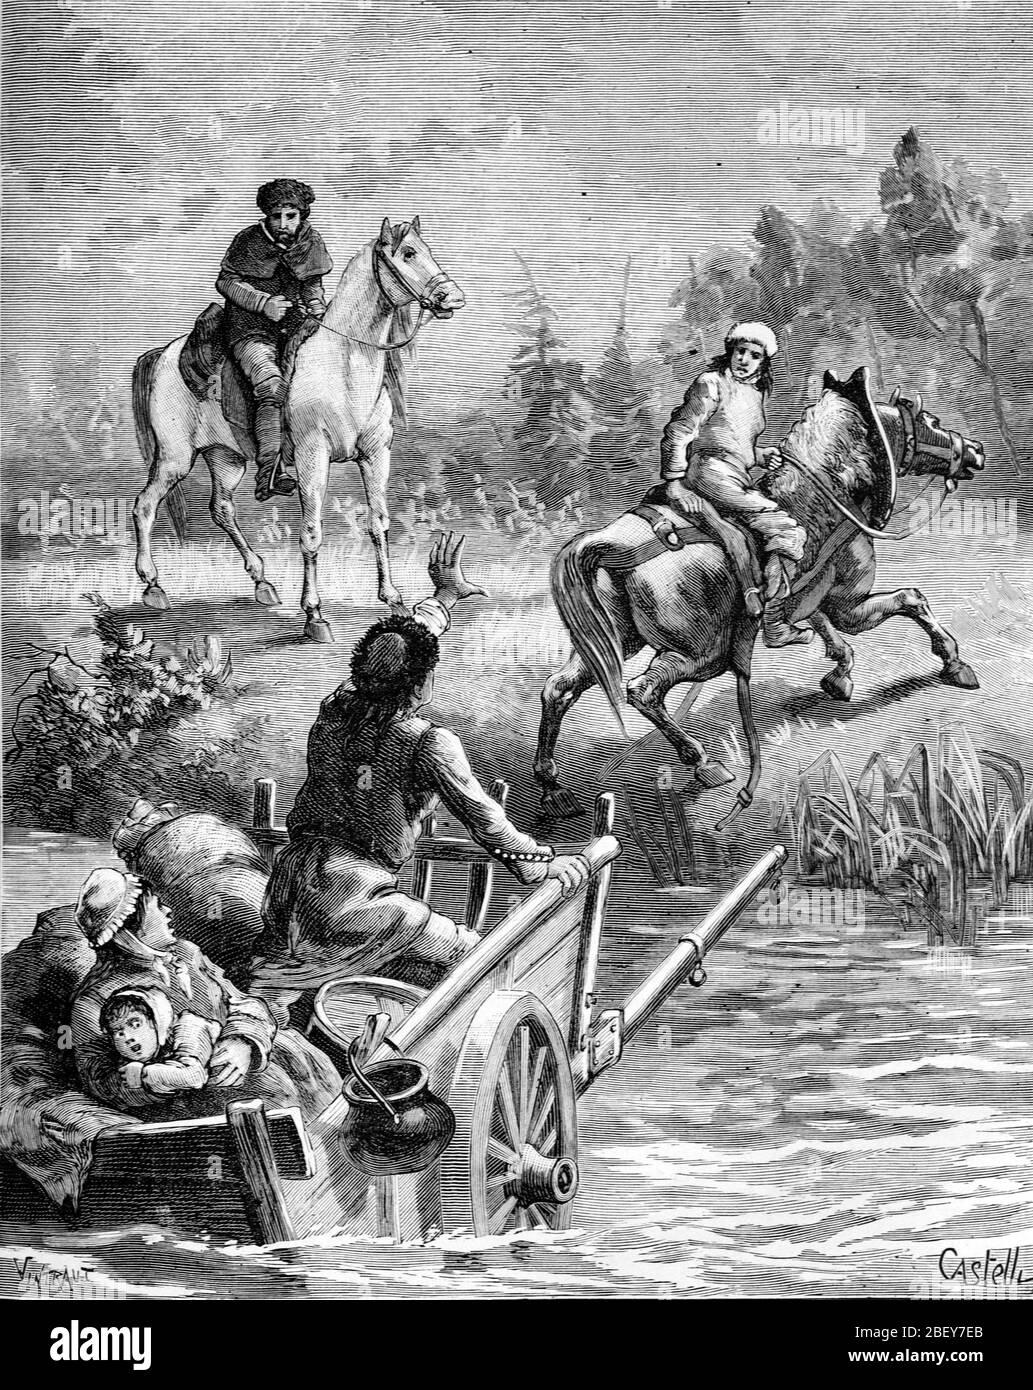 White Settlers in Wagons or Wagon Trains Crossing River on Migration West towards the Wild West American Frontier USA United Stats of America. Vintage or Old Illustration or Engraving 1888 Stock Photo